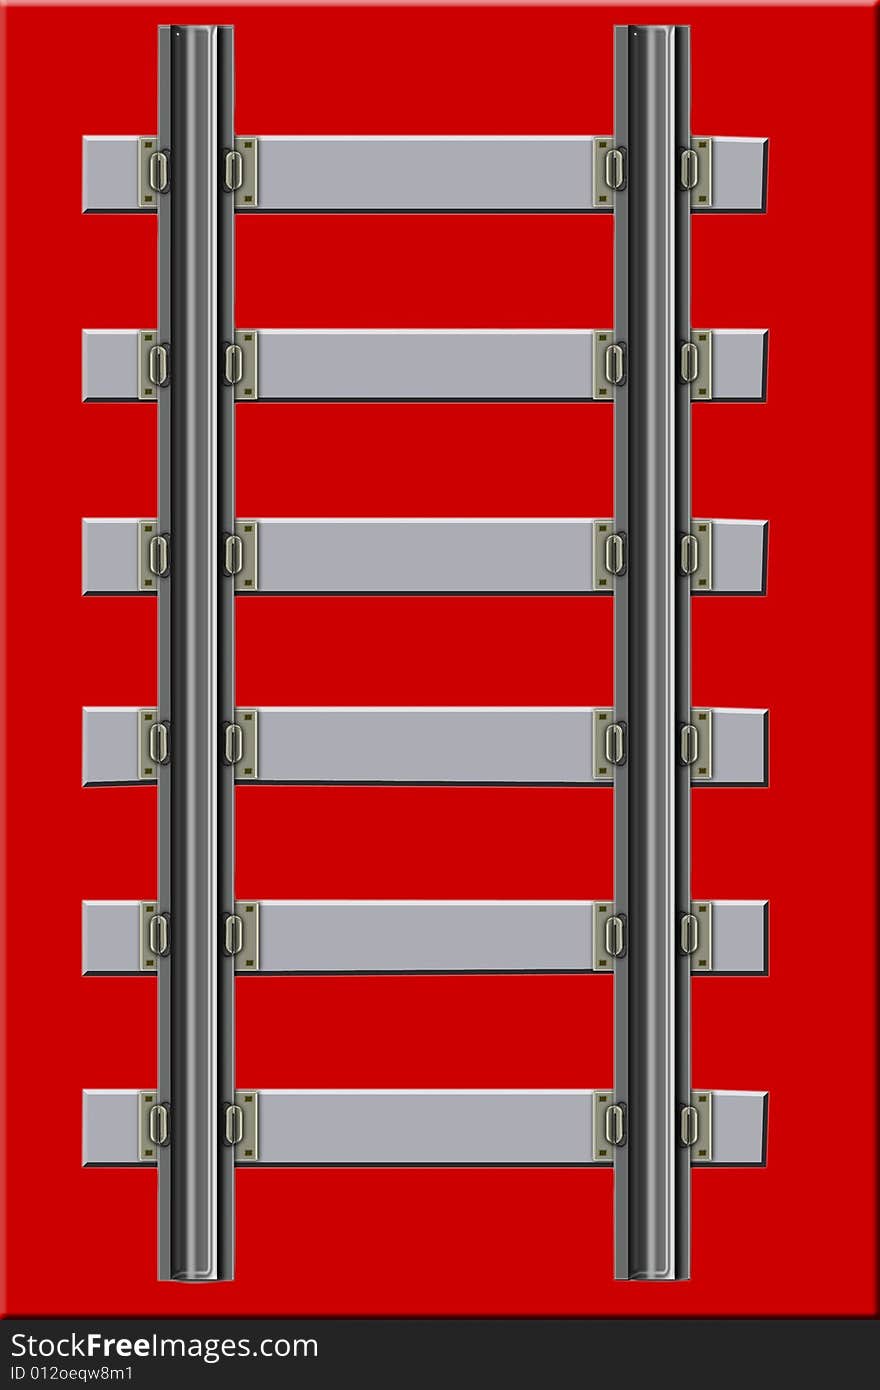 The railway track generated by computer with red background